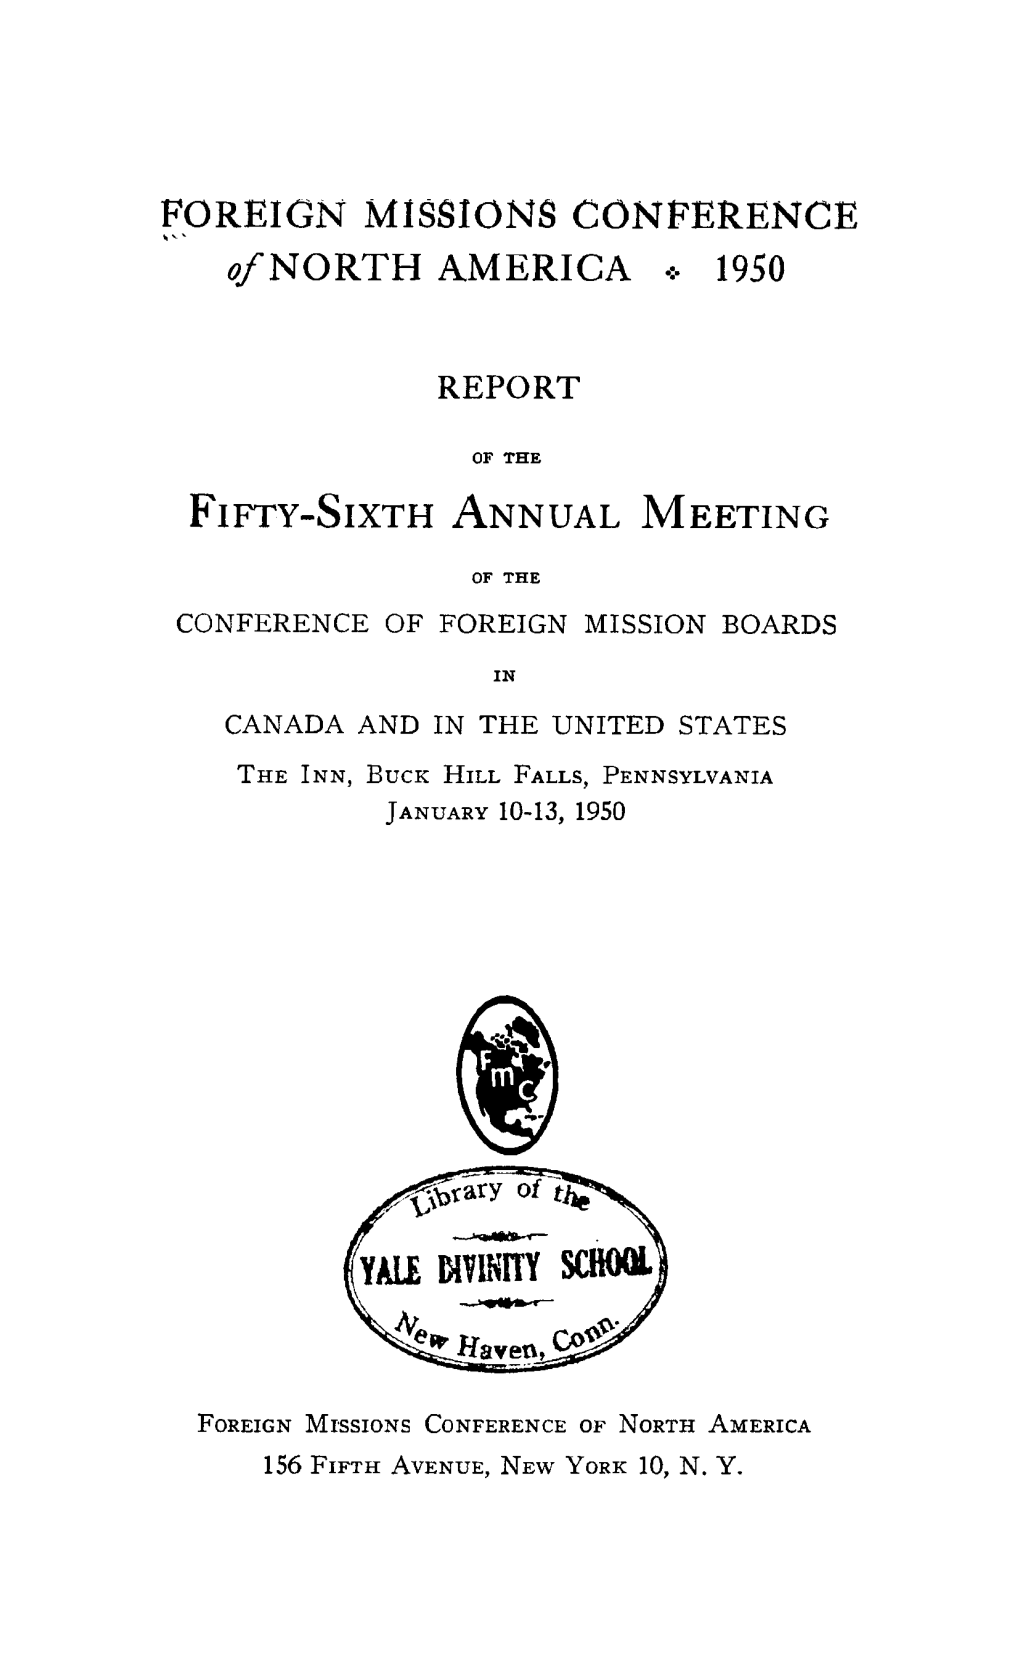 Foreign Missions Conference ¿/North America » 1950